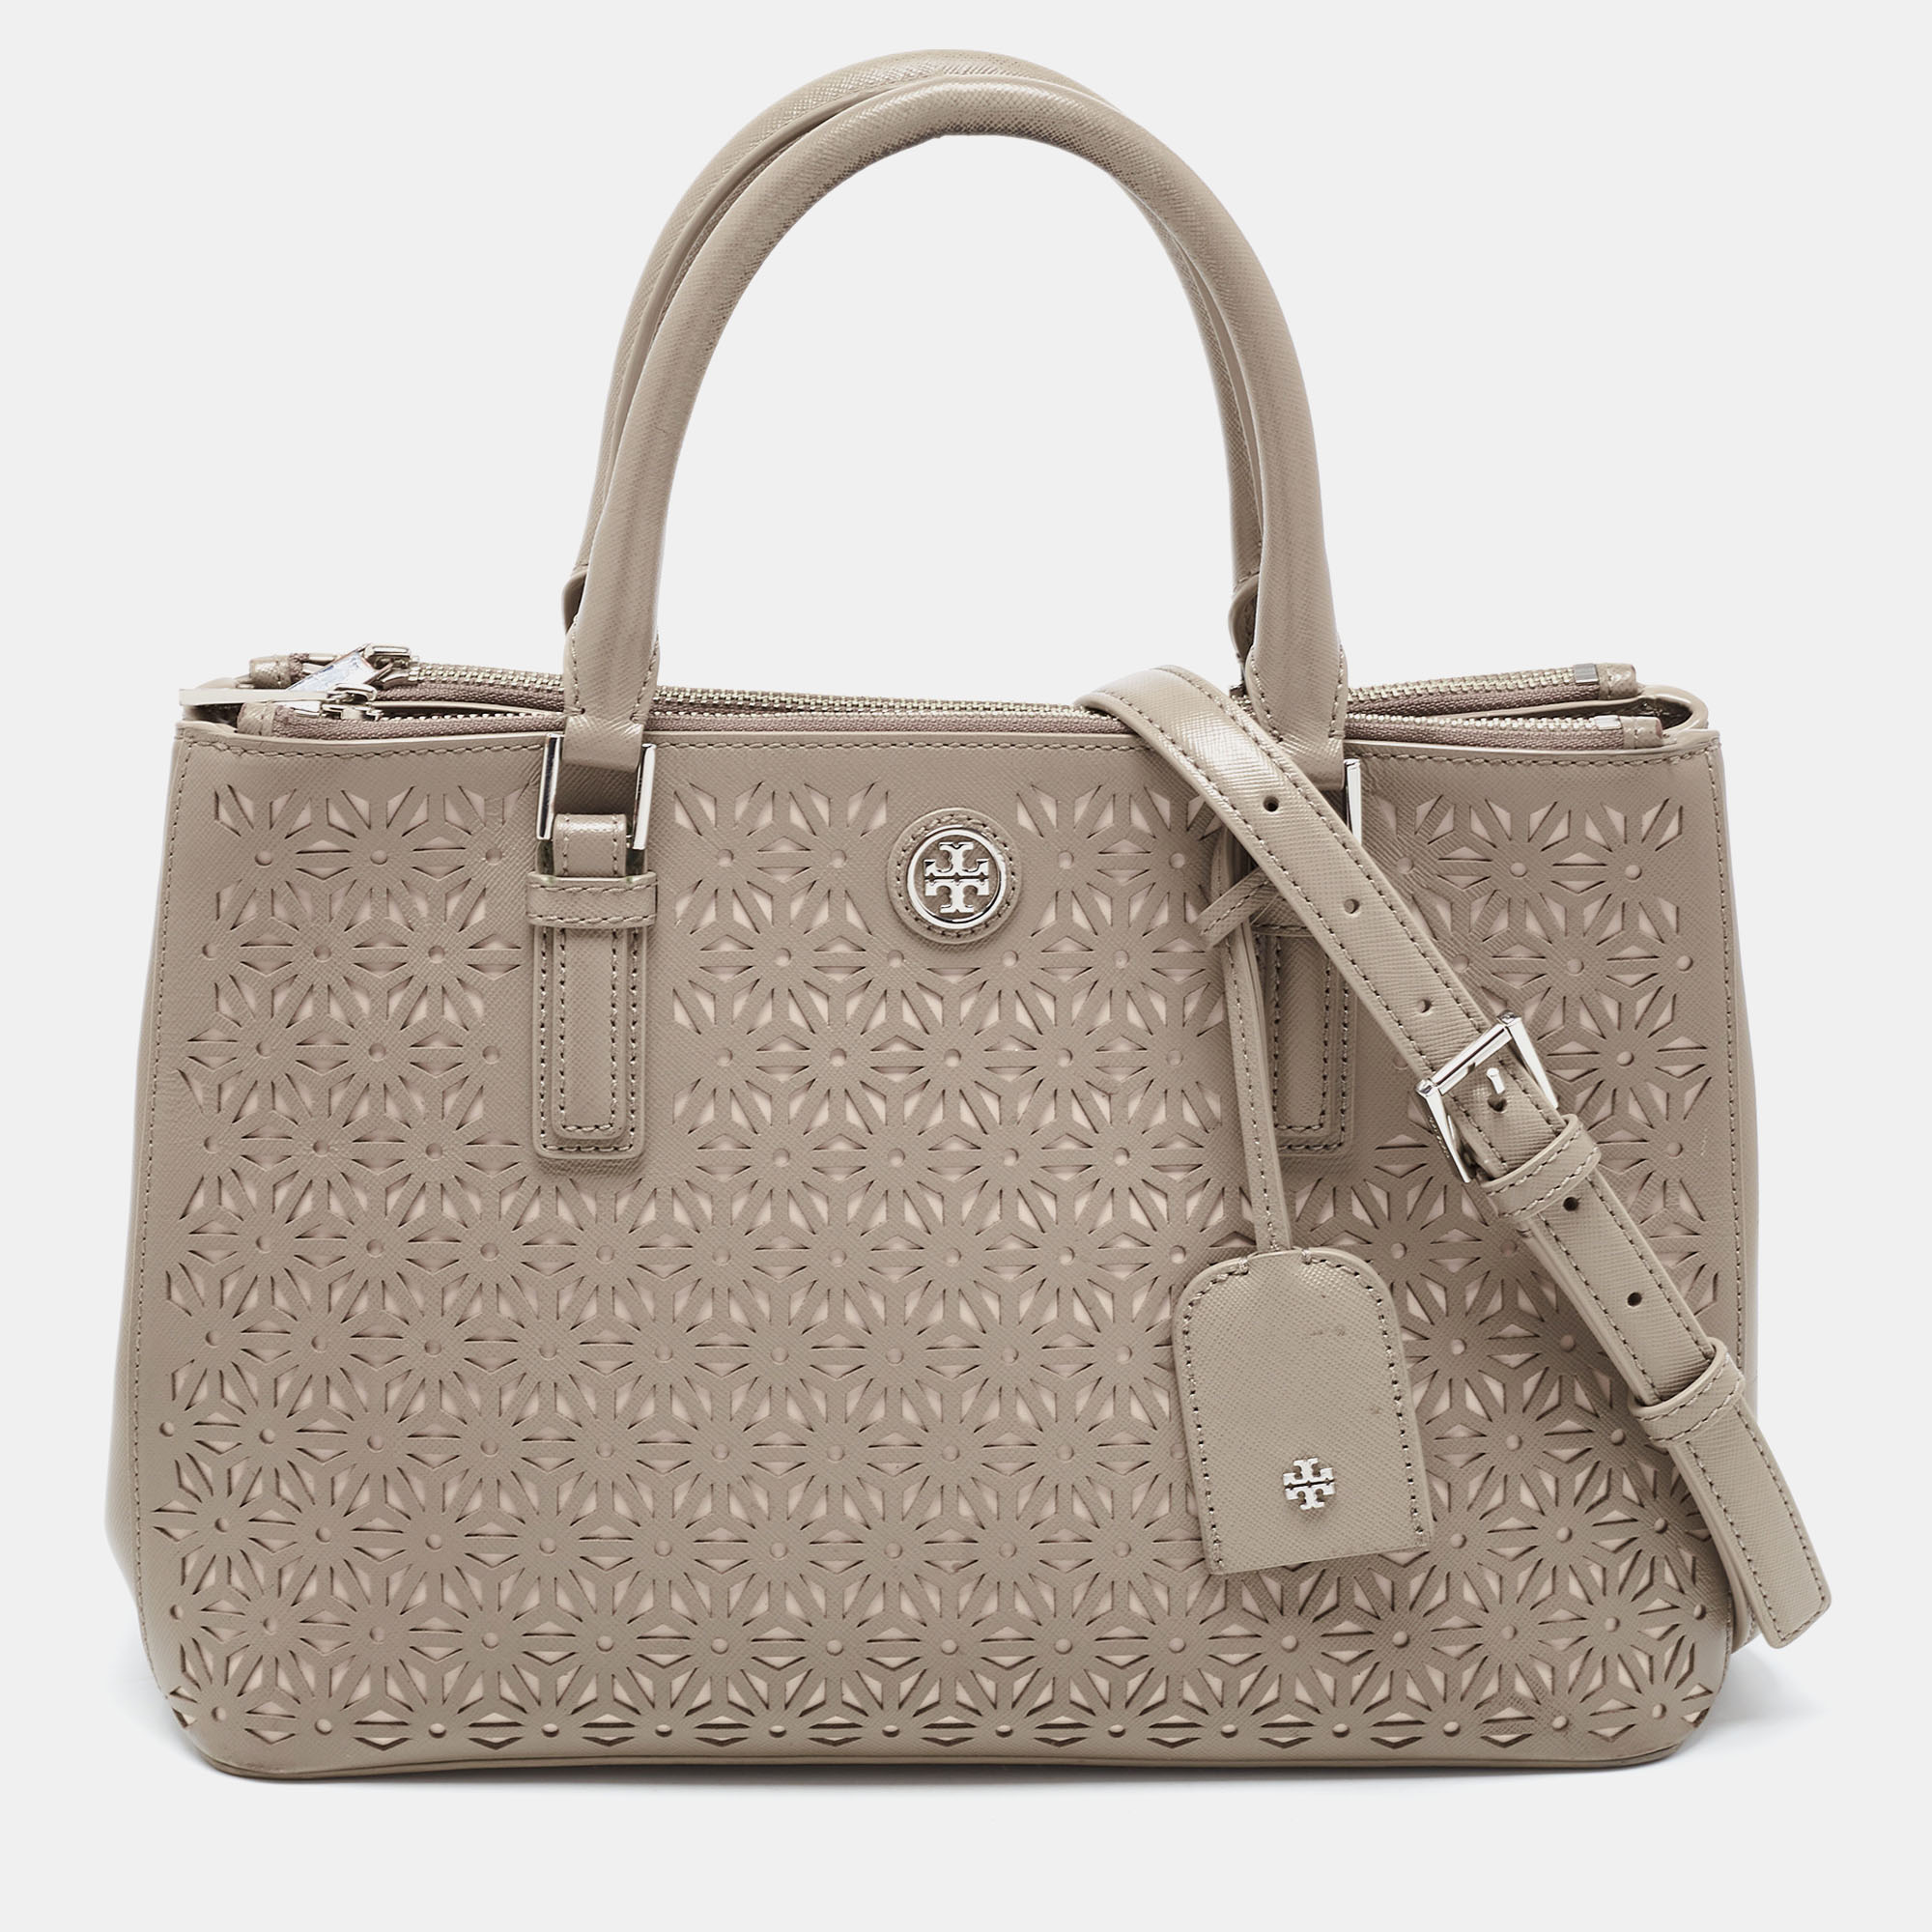 Pre-owned Tory Burch Grey Floral Laser Cut Leather Double Zip Robinson Tote